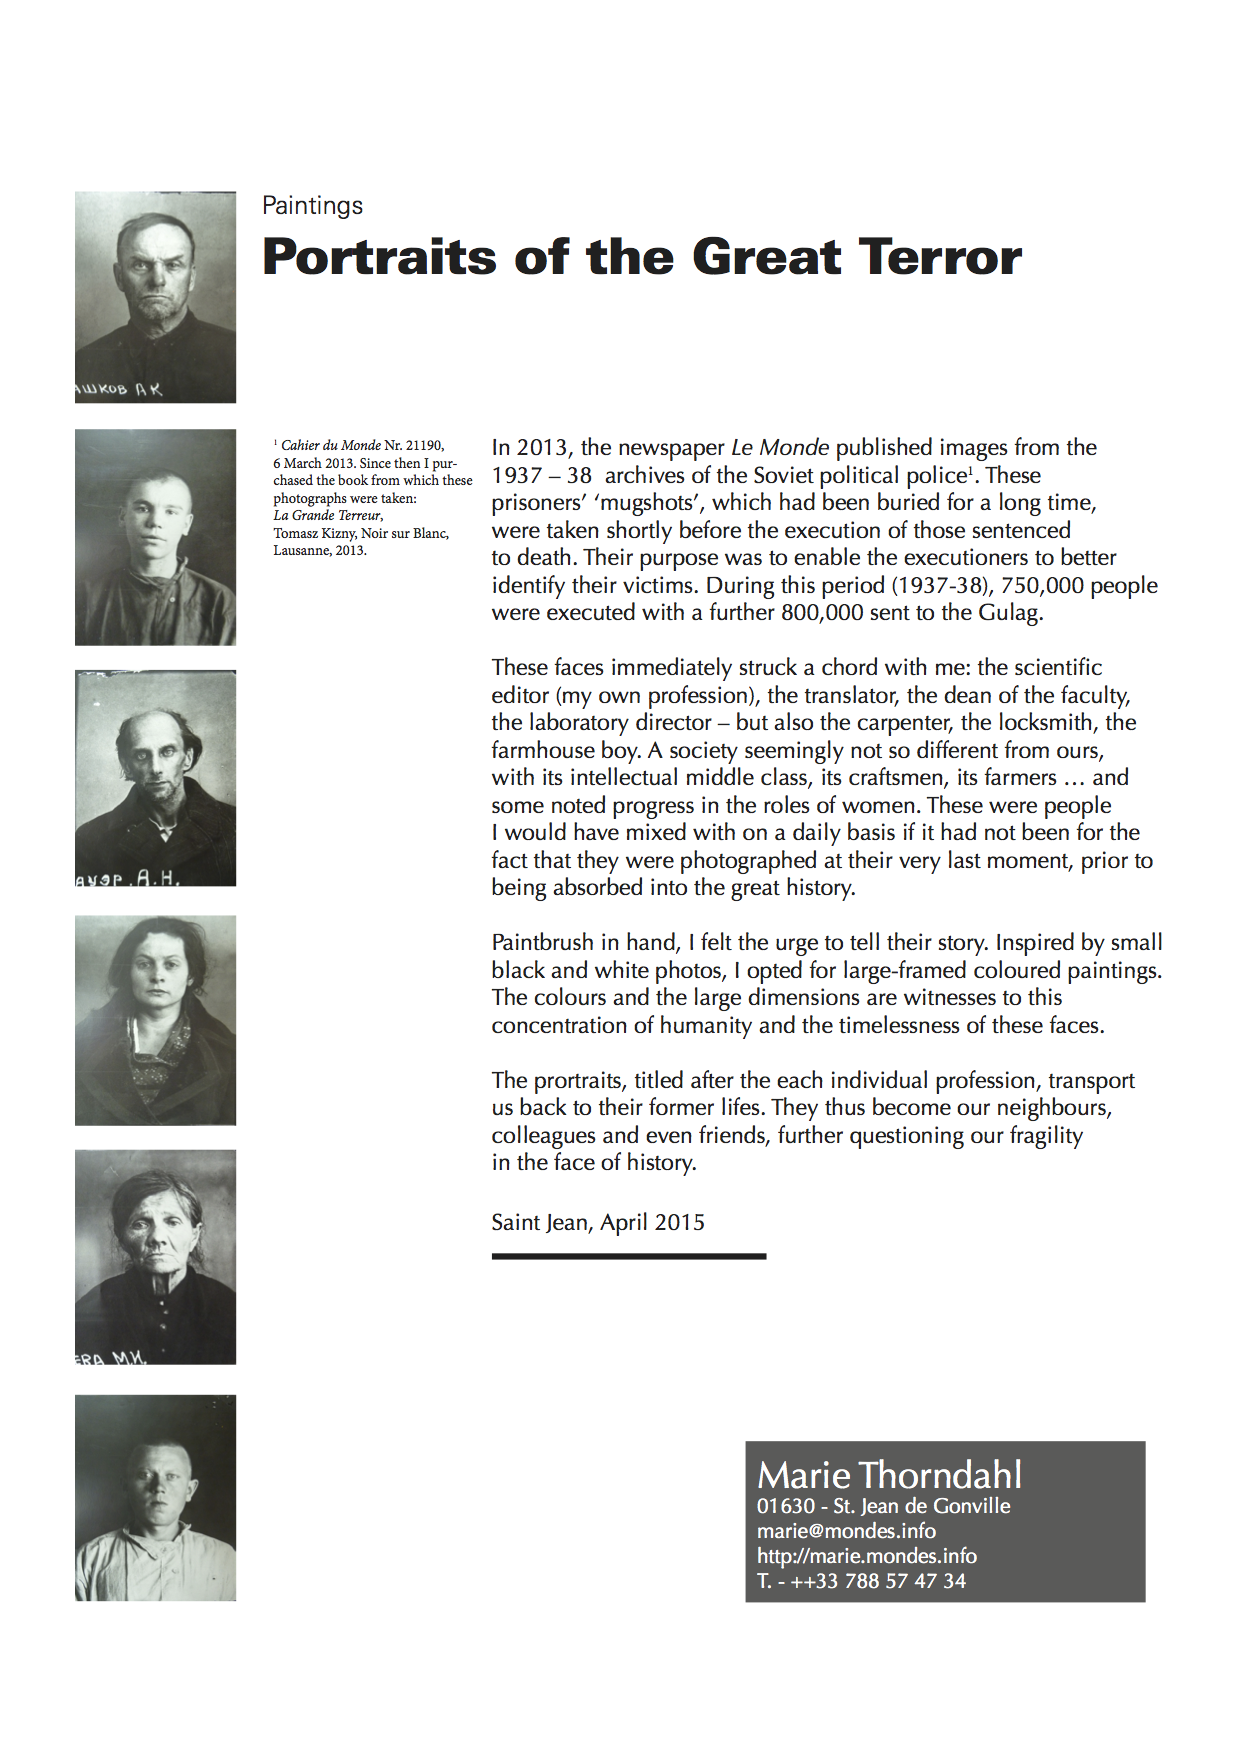 Portraits of the Great Terror Story